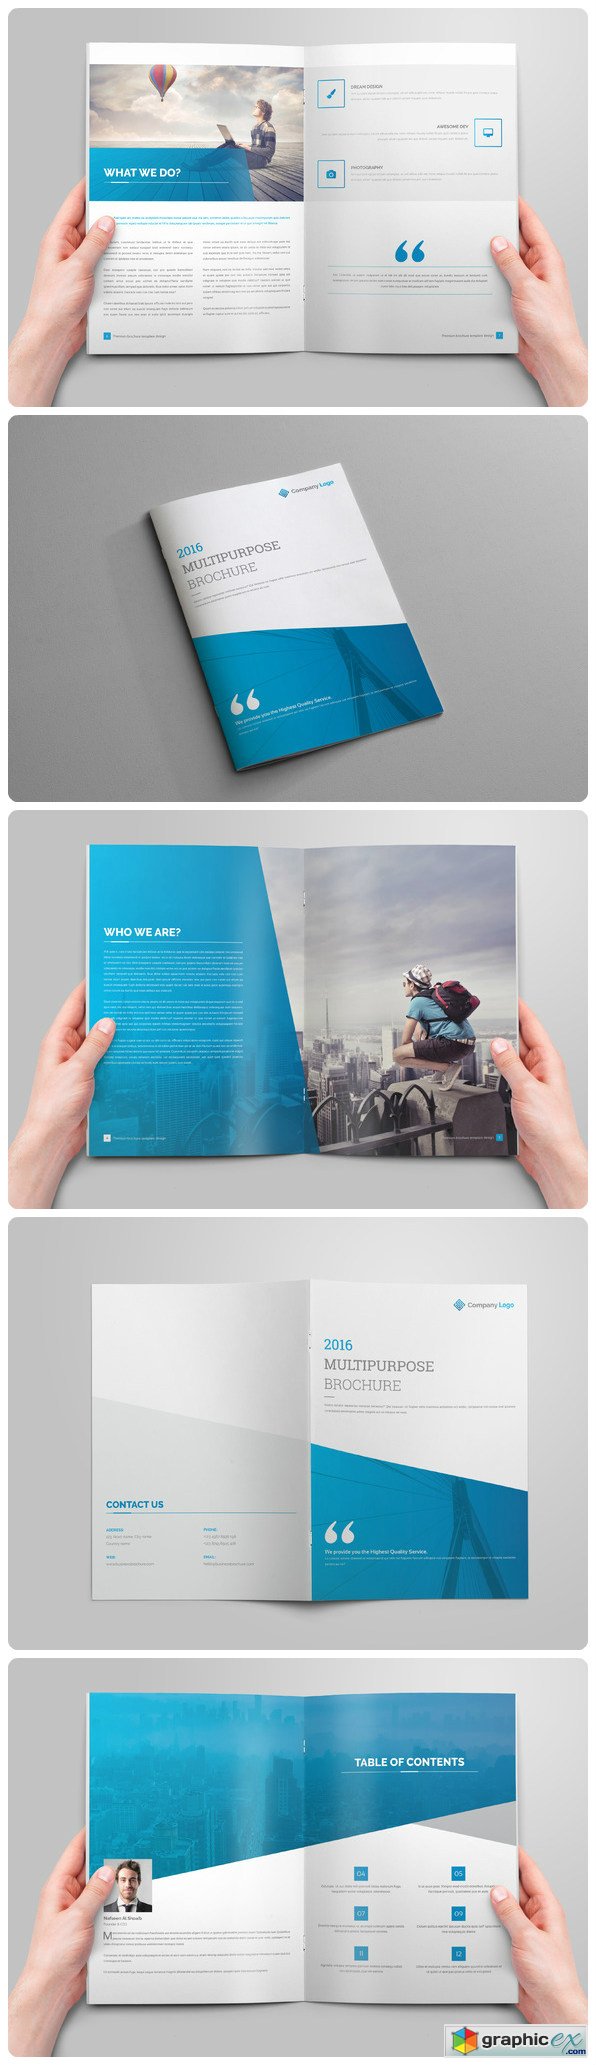 Multipurpose Brochure  16 Pages